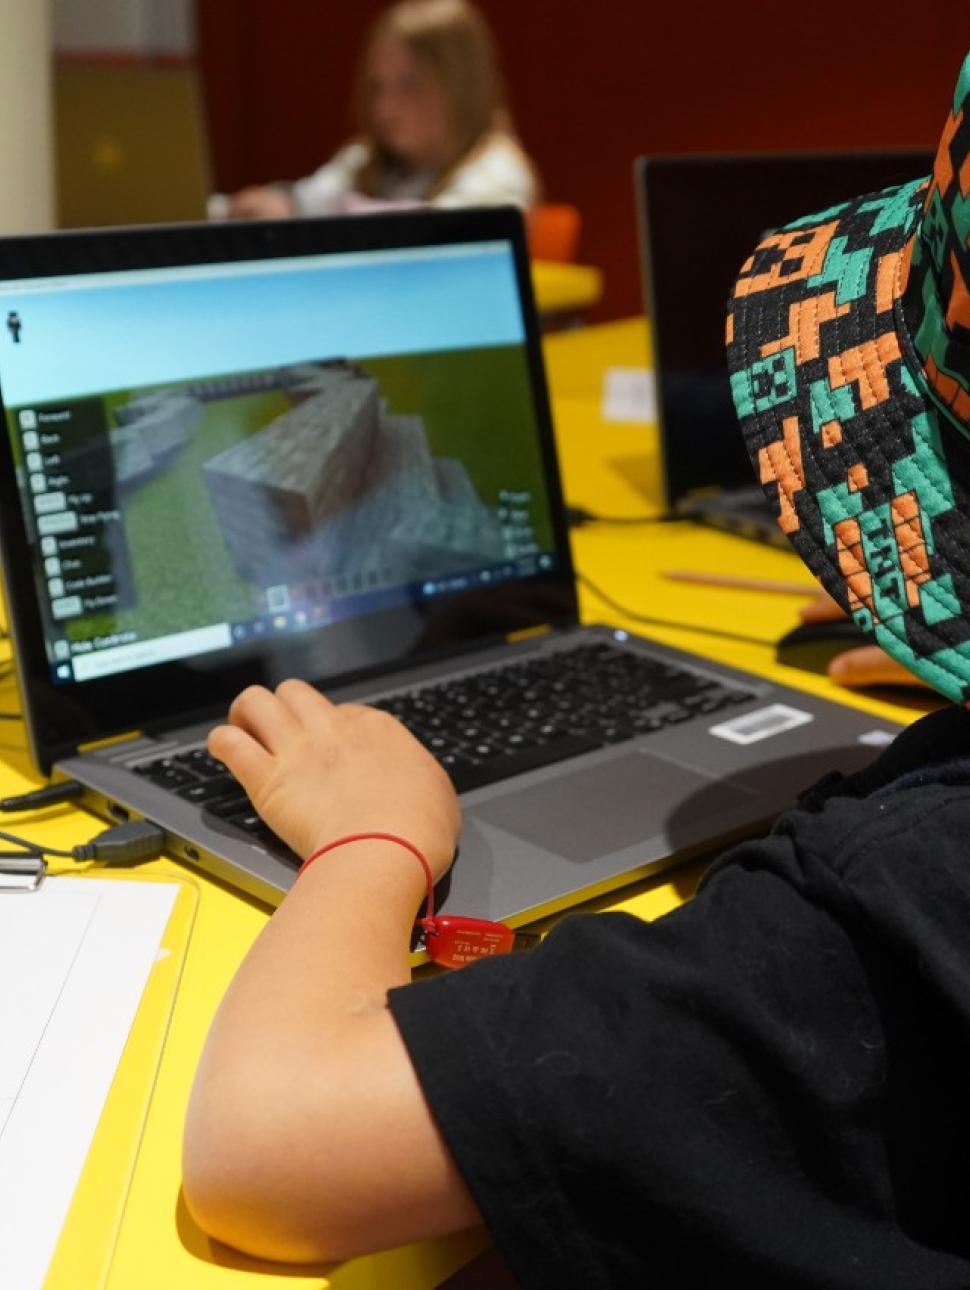 Image of a young person in a Minecraft hat plating Minecraft on a laptop.